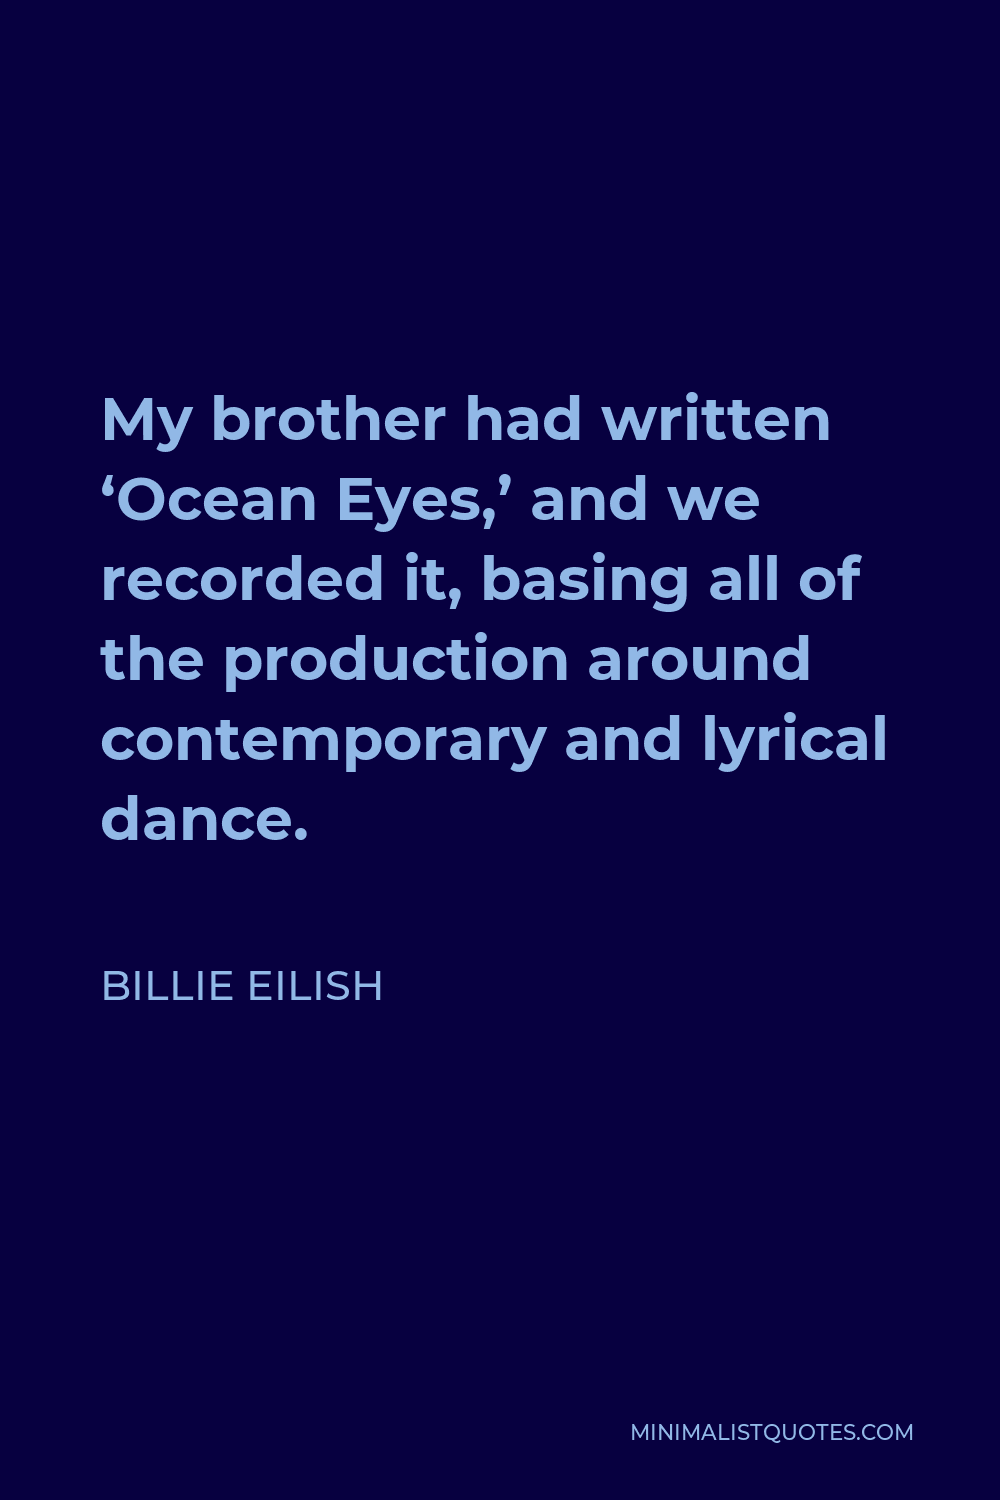 Billie Eilish Quote - My brother had written ‘Ocean Eyes,’ and we recorded it, basing all of the production around contemporary and lyrical dance.